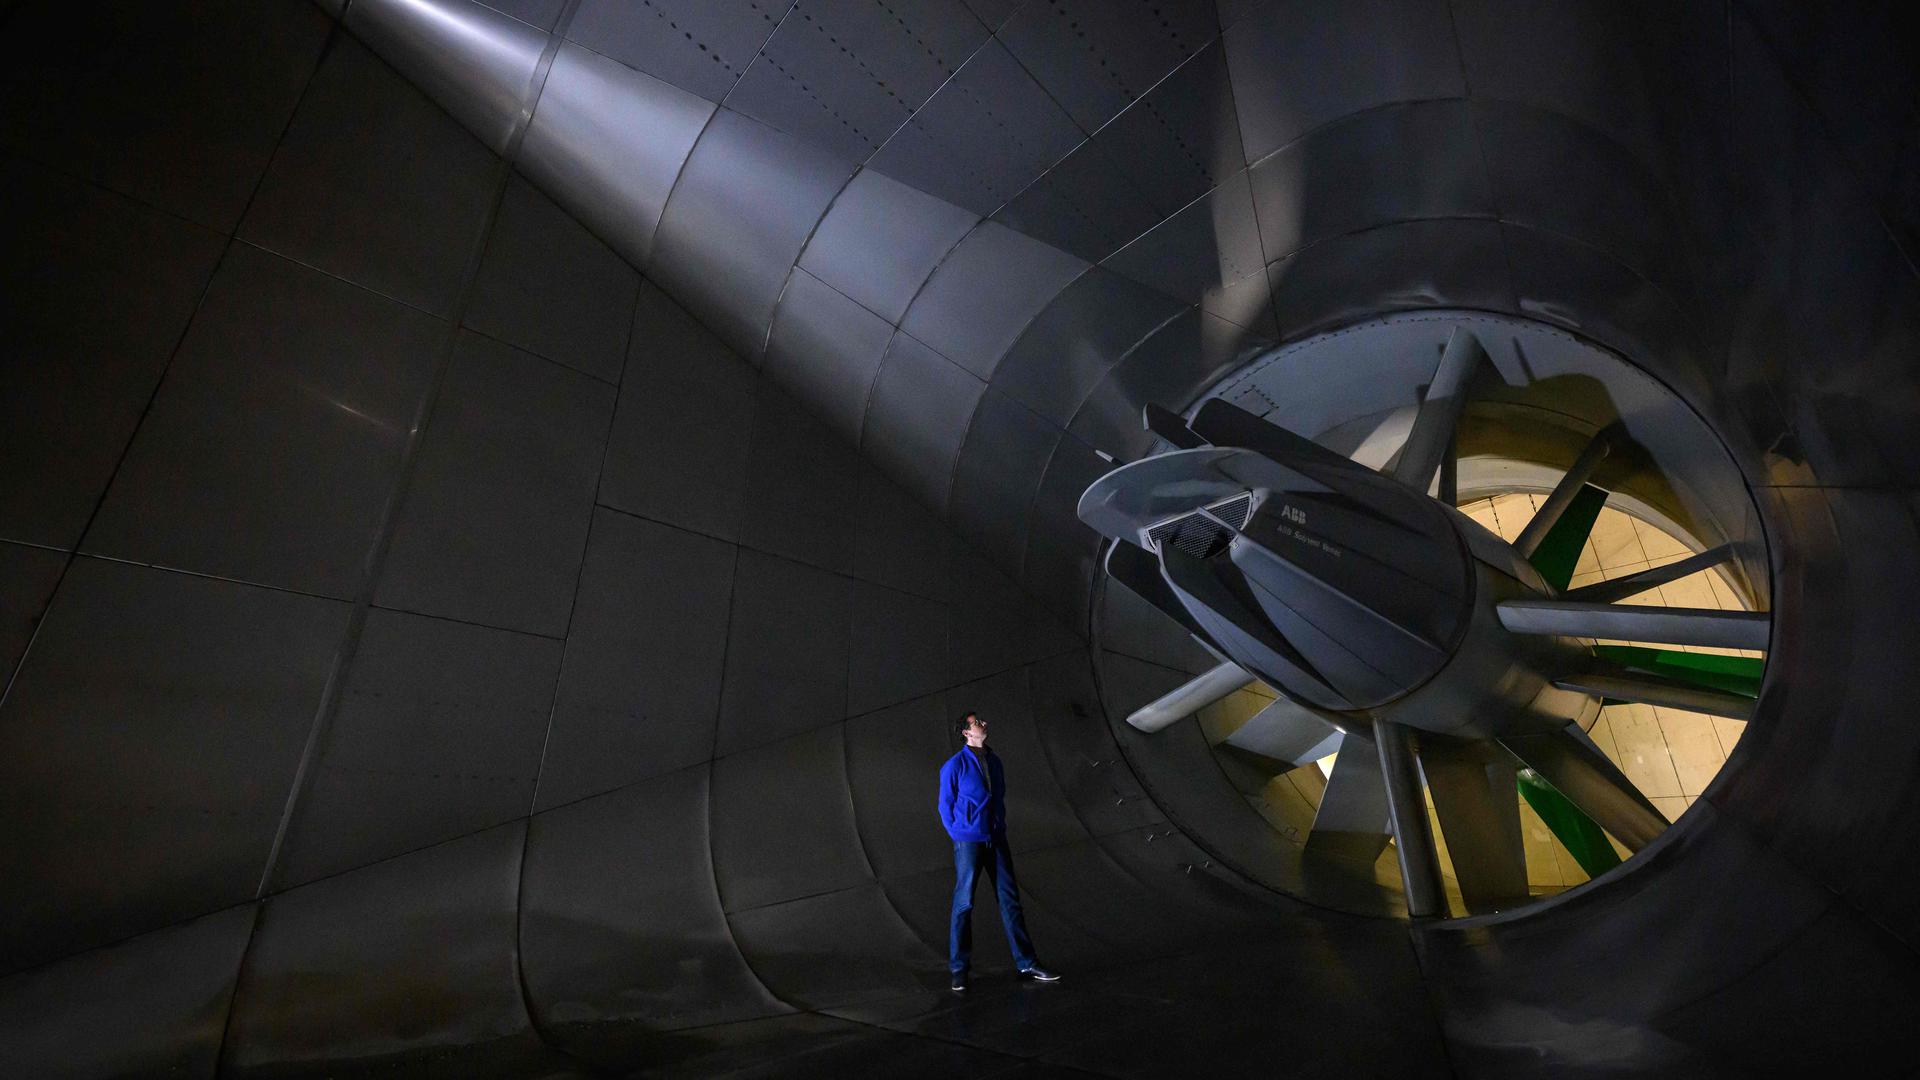 TOPSHOT - An employee of the CSTB (Centre scientifique et technique du batiment, or Scientific and Technical Centre for Building) stands next to a giant fan of the Jules Verne Climatic Wind Tunnel, a research facility used to study and analyse the building and construction elements under the extreme climatic conditions, in Nantes, western France, on May 9, 2023. (Photo by LOIC VENANCE / AFP)